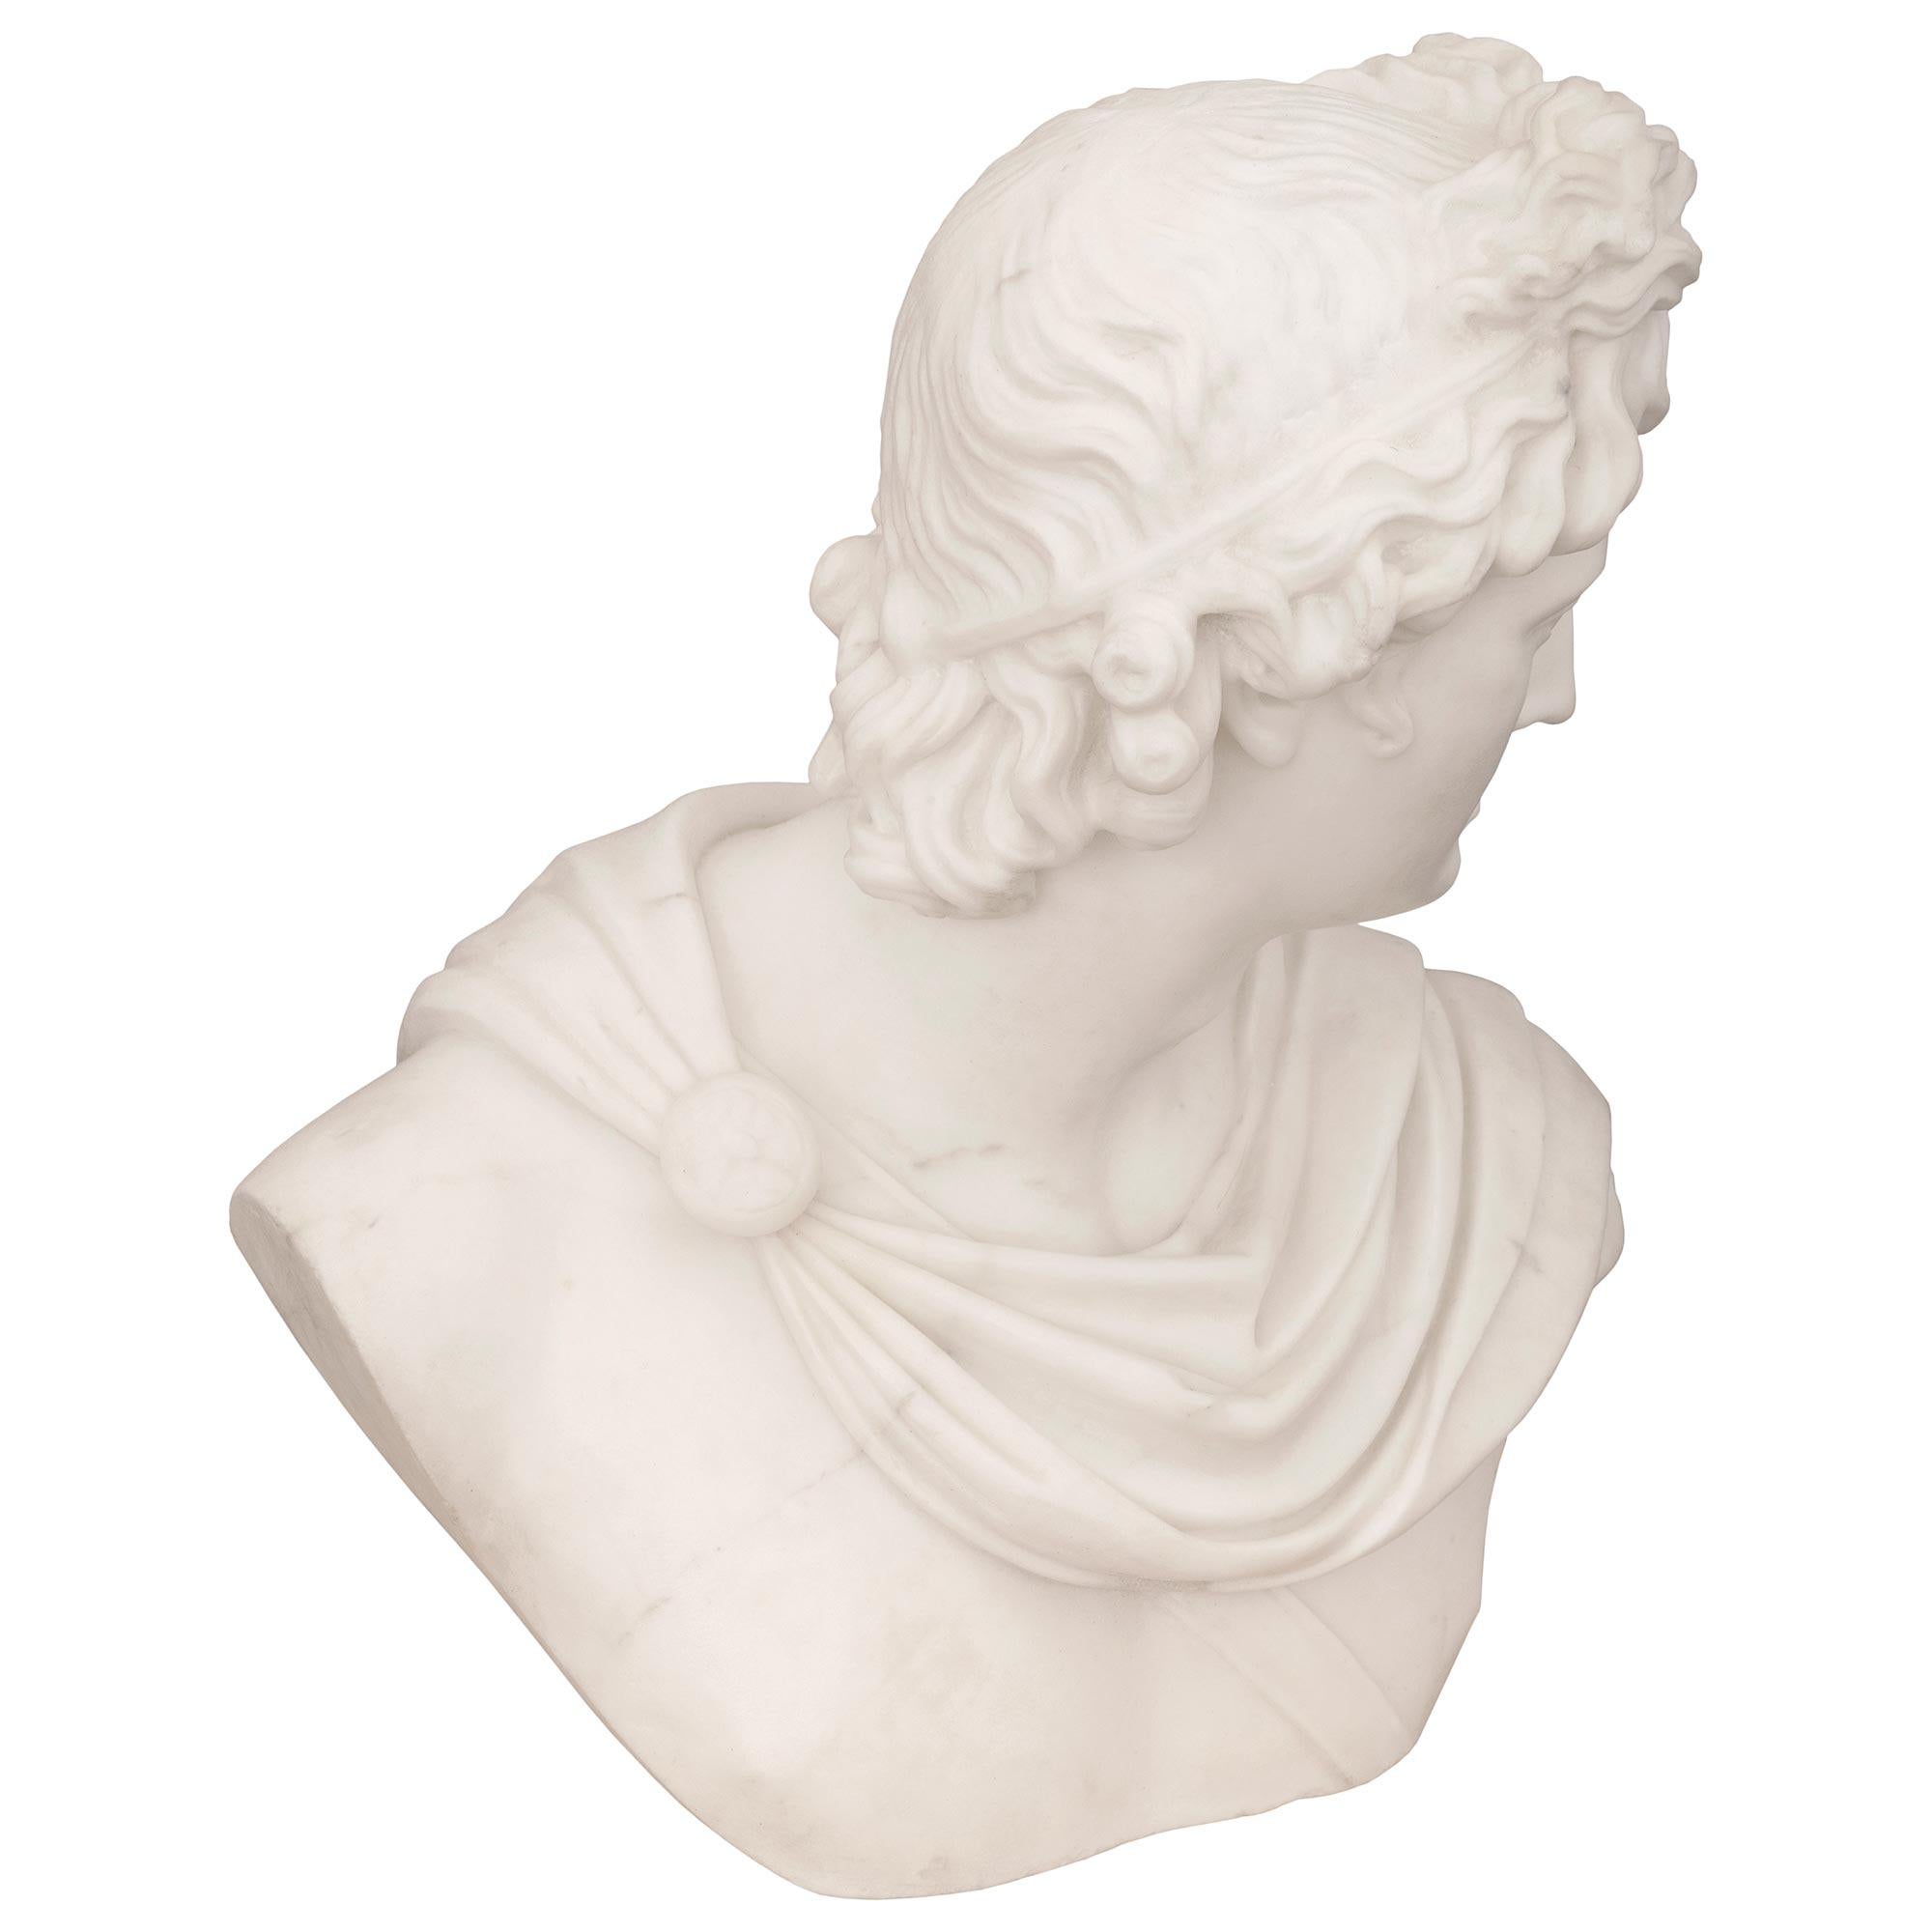 An exceptional Italian 19th century neoclassical st. white Carrara marble bust of Apollo Belvedere signed A. Frilli Florence. The wonderfully executed bust depicts the handsome Apollo draped in a flowing paludamentum fastened by a fibula with a band